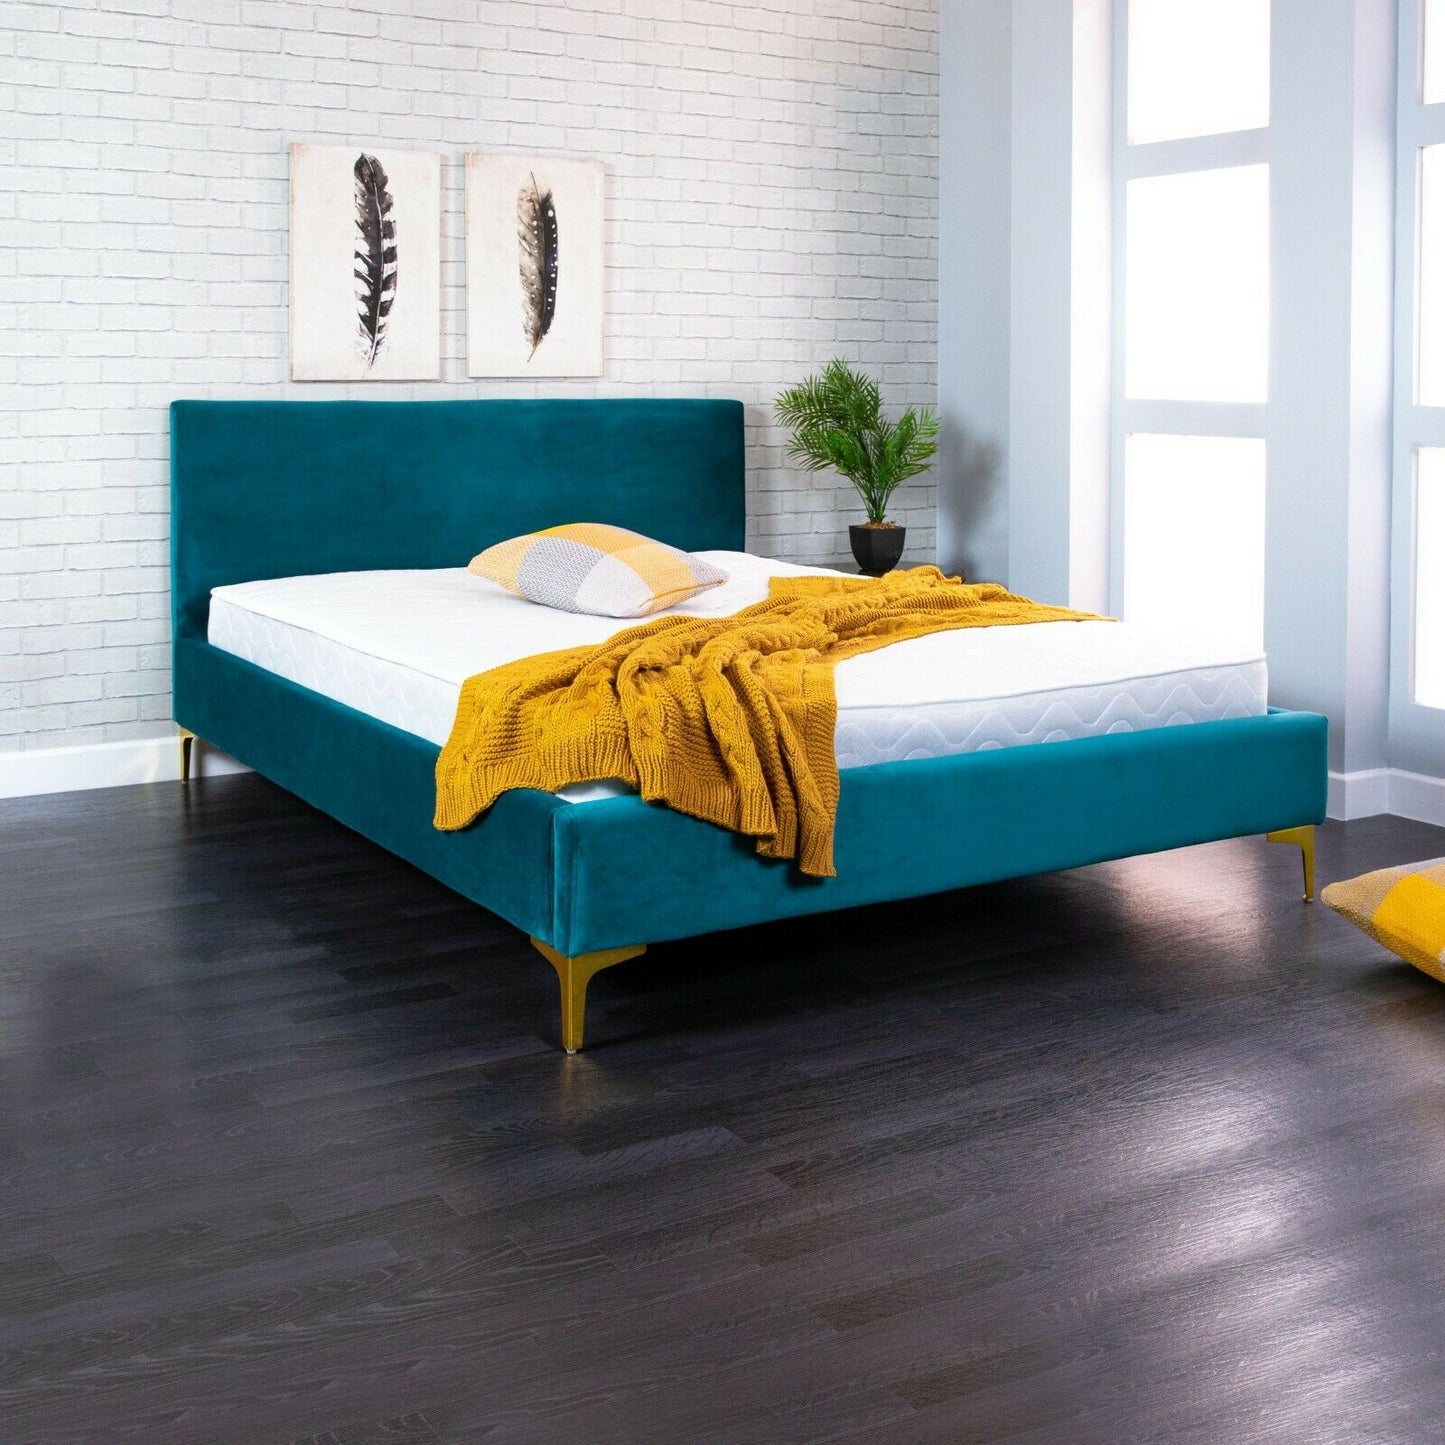 Plush Teal Bed Frame Double